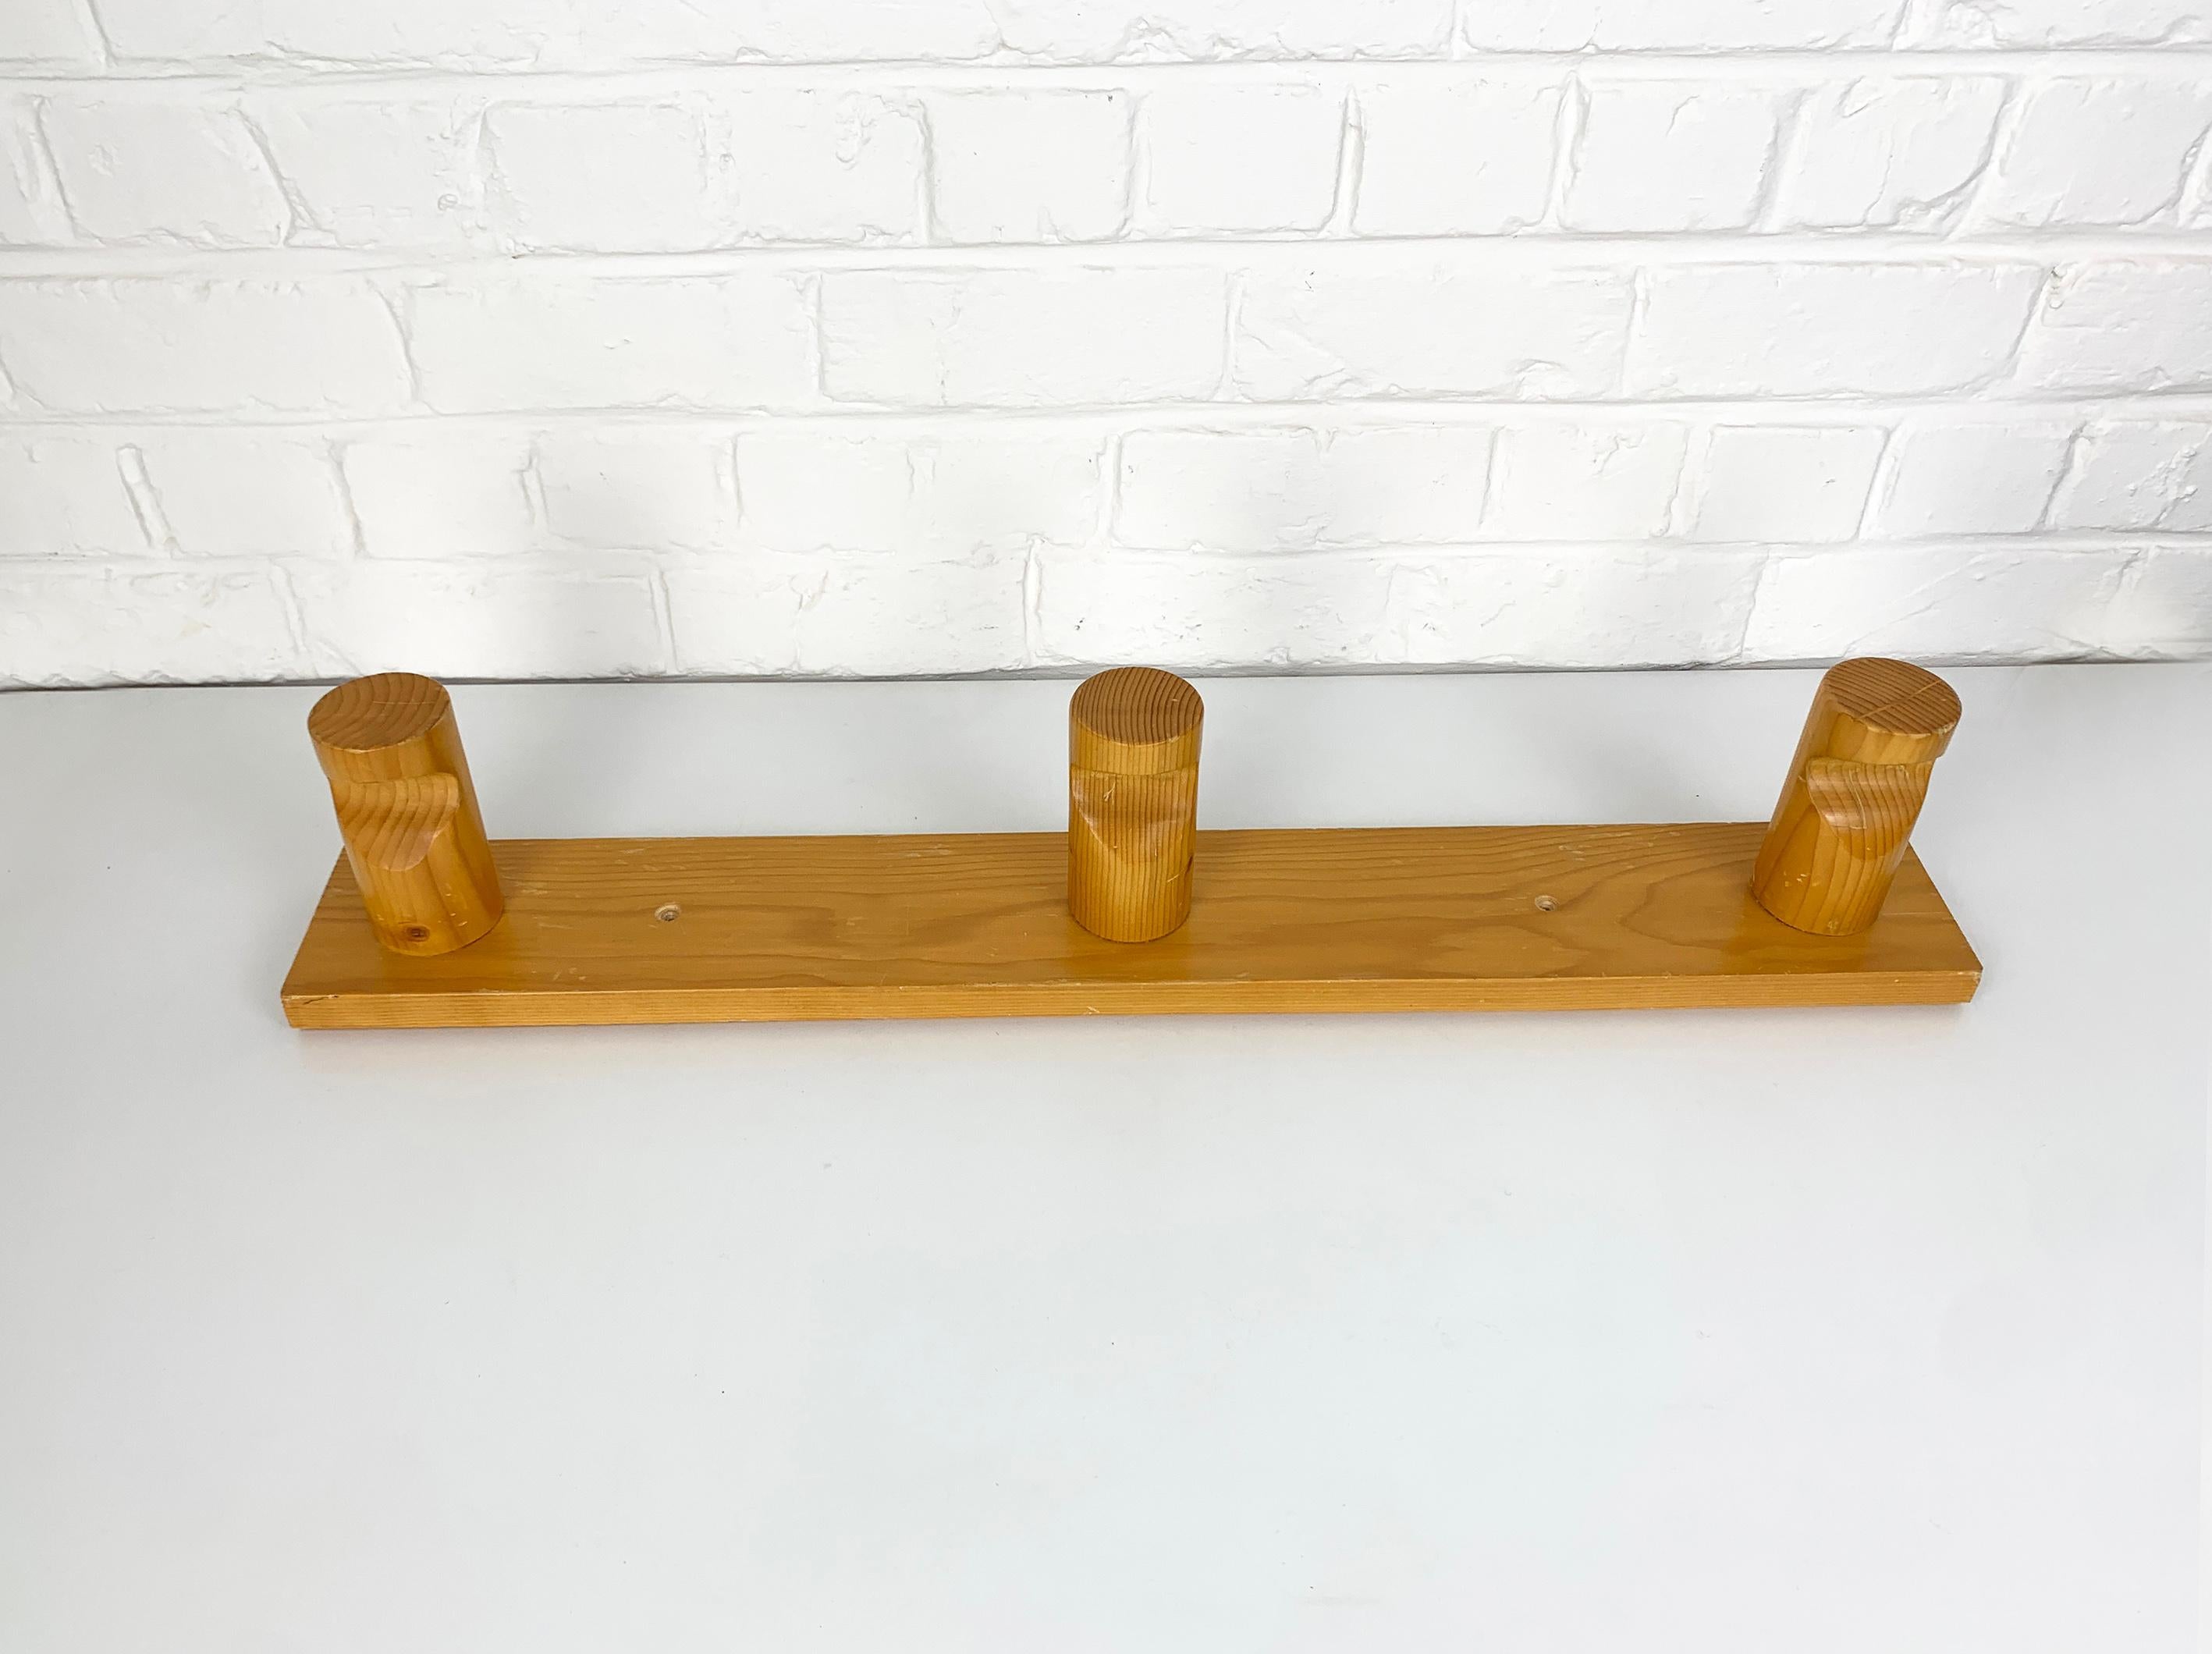 20th Century French Coat Rack by Charlotte Perriand for Les Arcs, Pinewood, 1960s